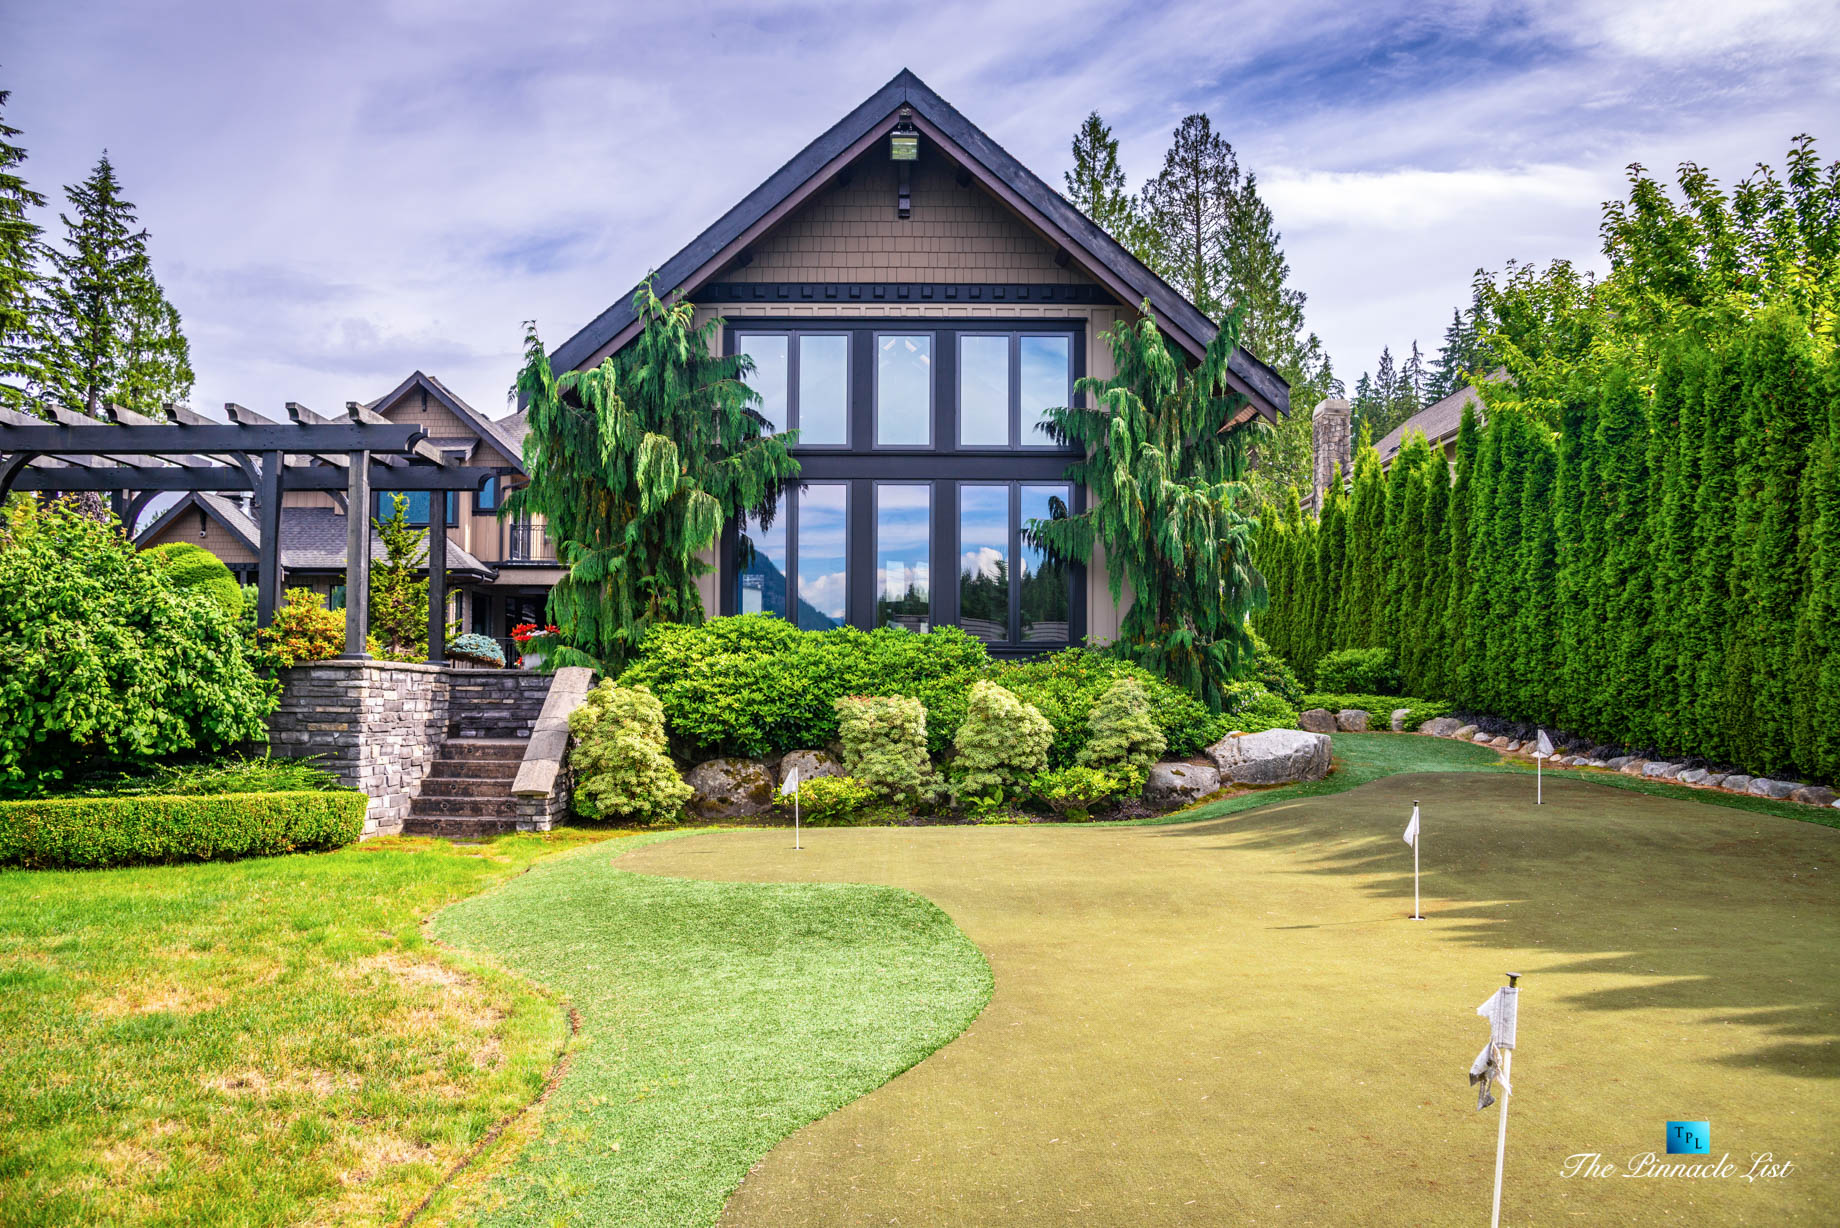 3053 Anmore Creek Way, Anmore, BC, Canada – Backyard Golf Putting Green Landscaping – Luxury Real Estate – Greater Vancouver Home